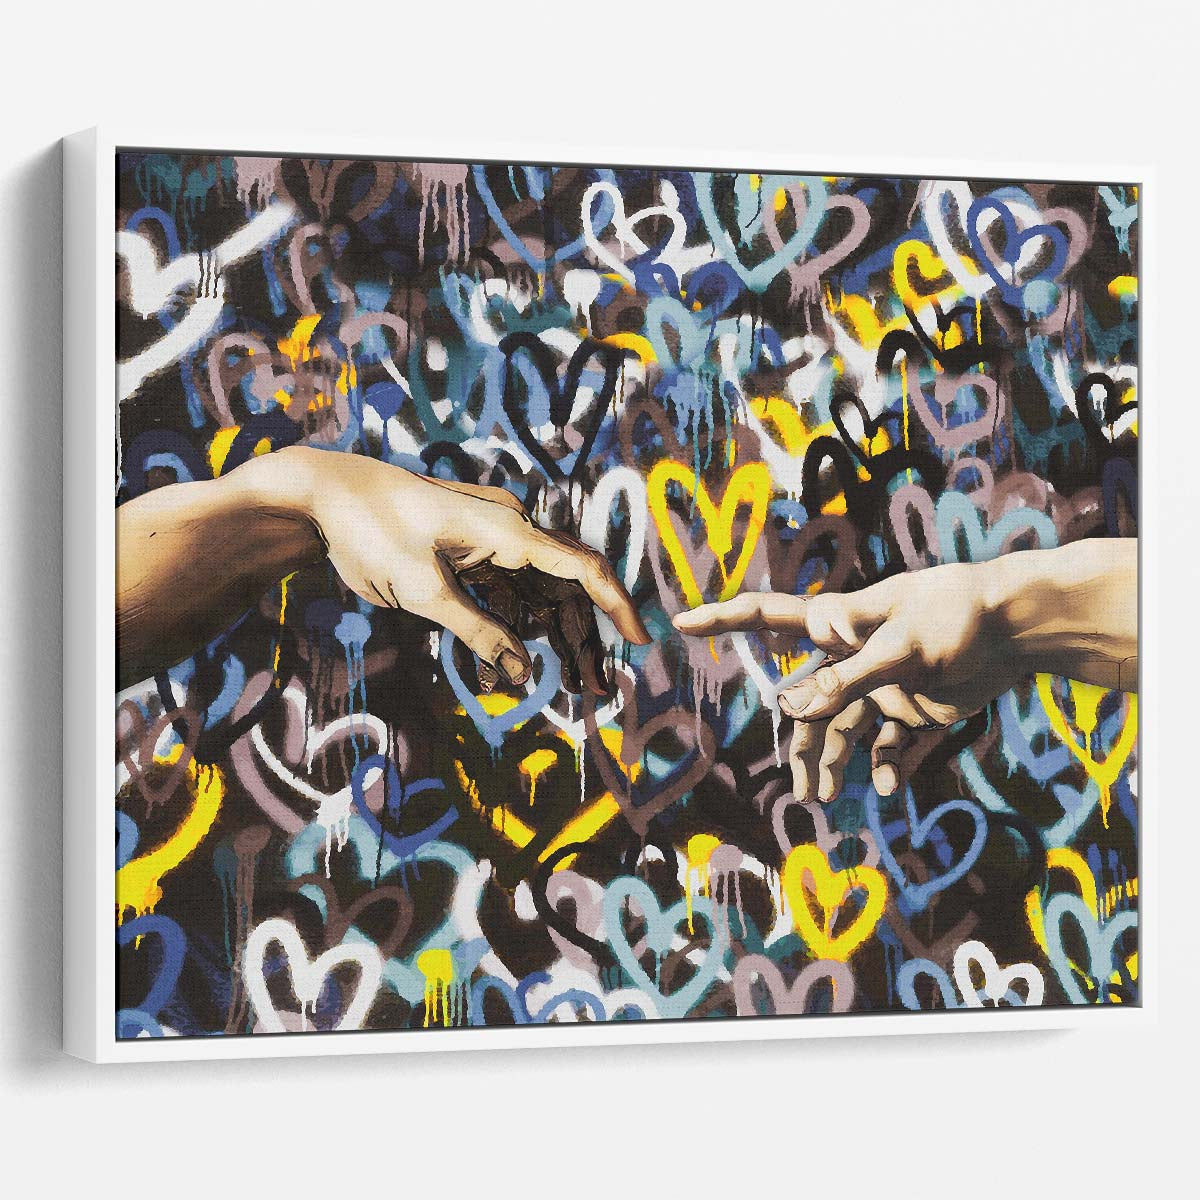 Hands Love Touch Graffiti Dark Background Wall Art by Luxuriance Designs. Made in USA.